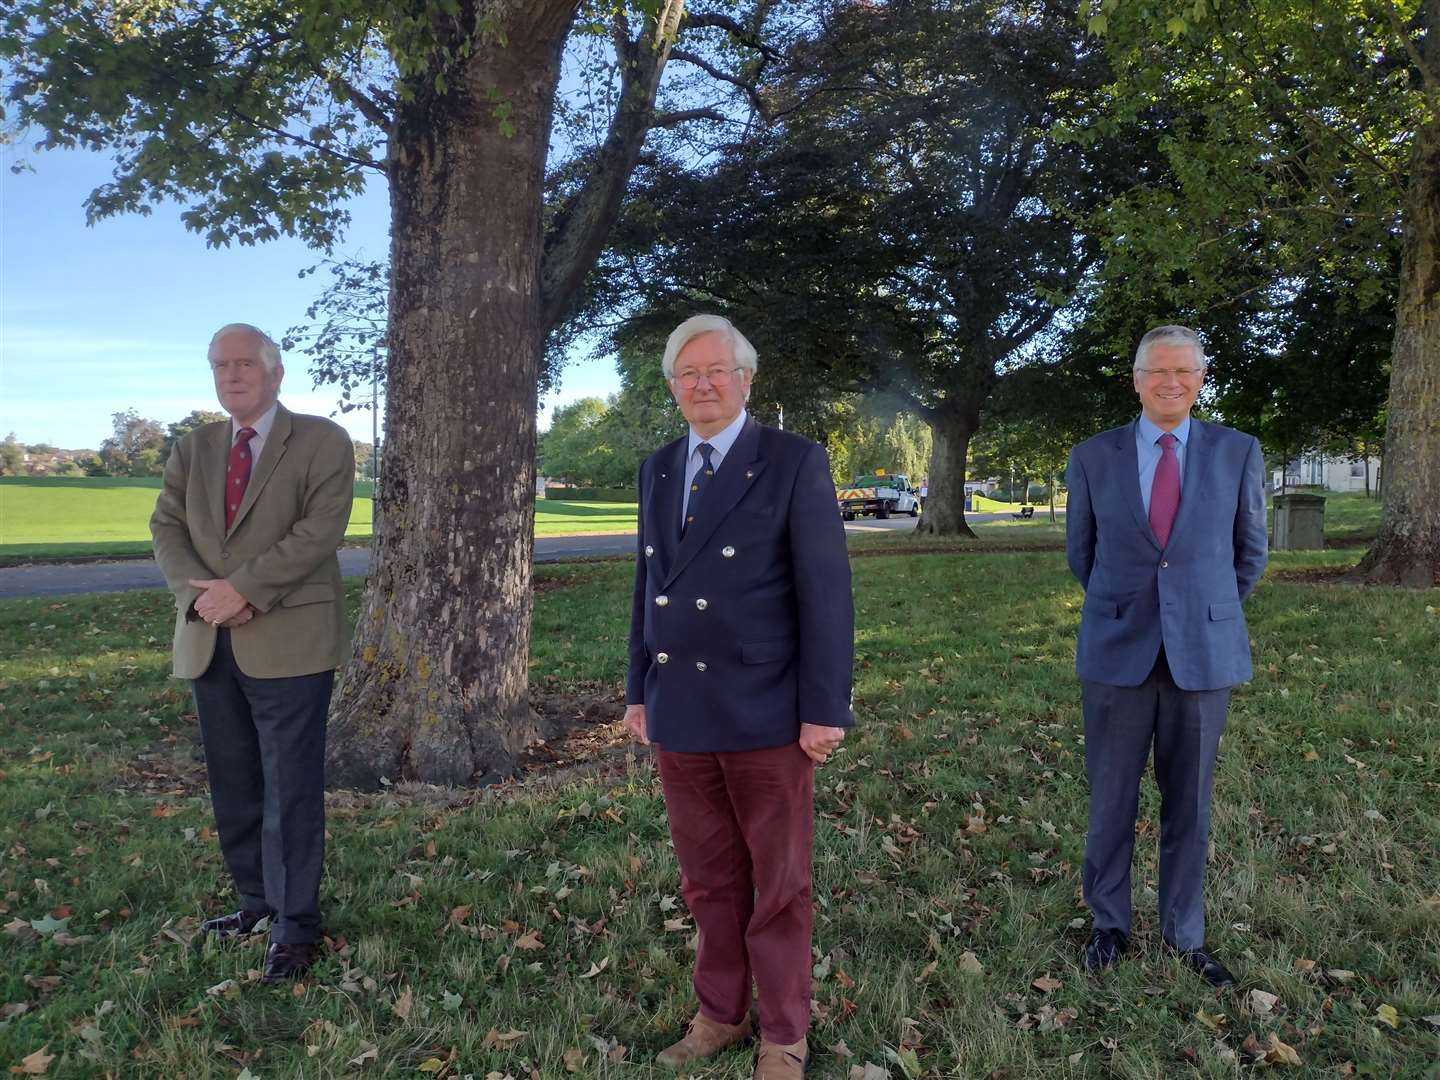 (From left) Lord Lieutenant of Moray Major General Seymour Monro, Lieutenant Colonel Grenville Johnston, former Lord Lieutenant of Moray, and Lord Lieutenant of Banffshire Andrew Simpson.